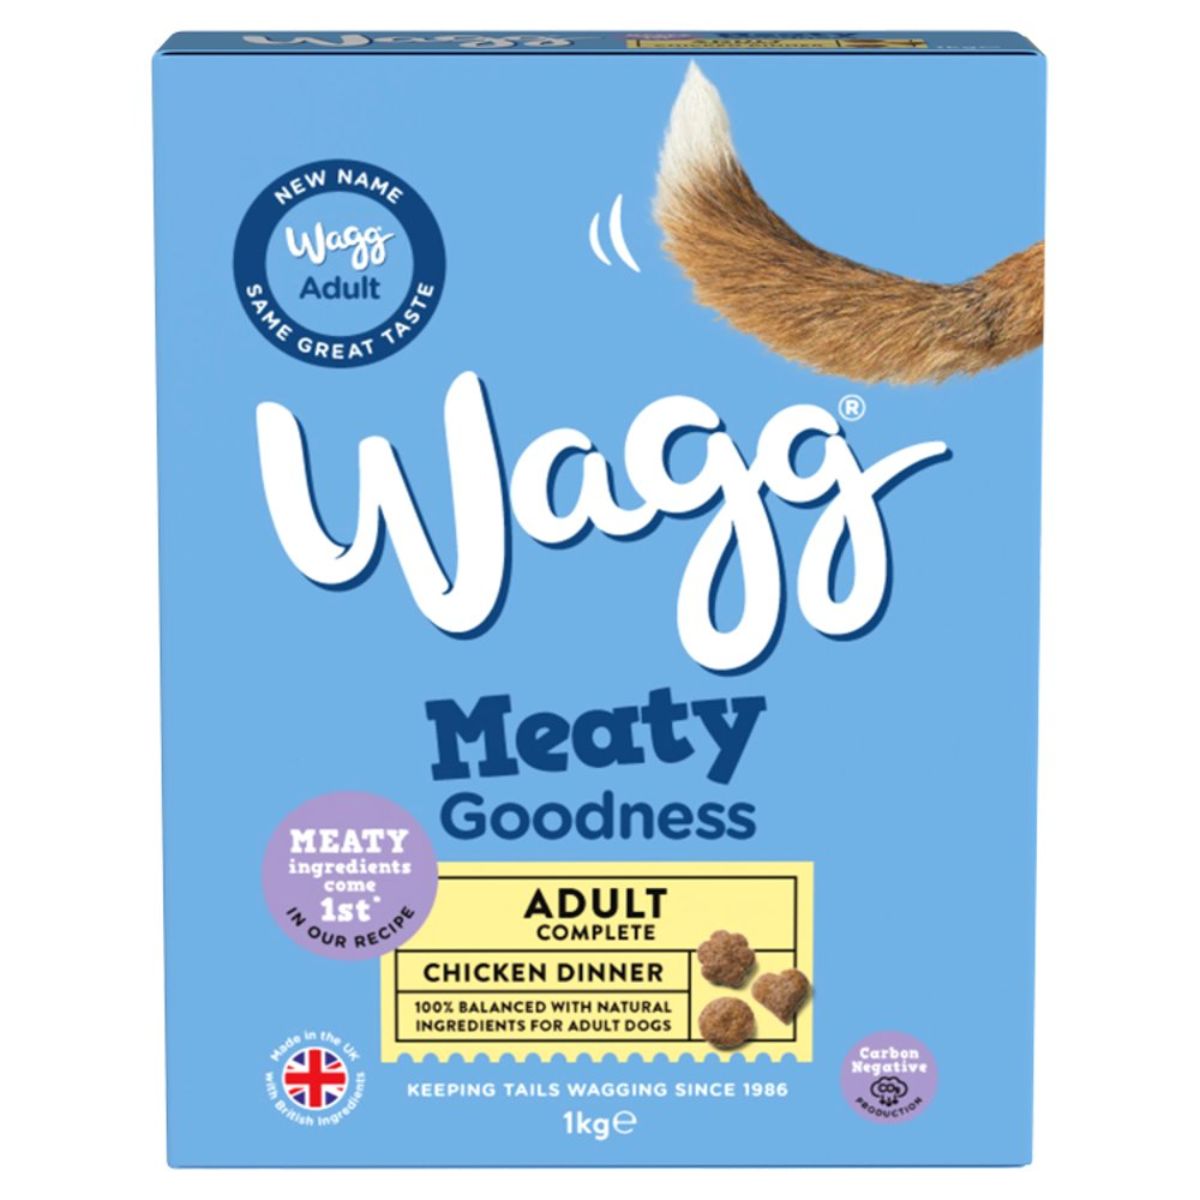 Wagg - Meaty Goodness Adult Complete Chicken Dinner - 1kg cat food.